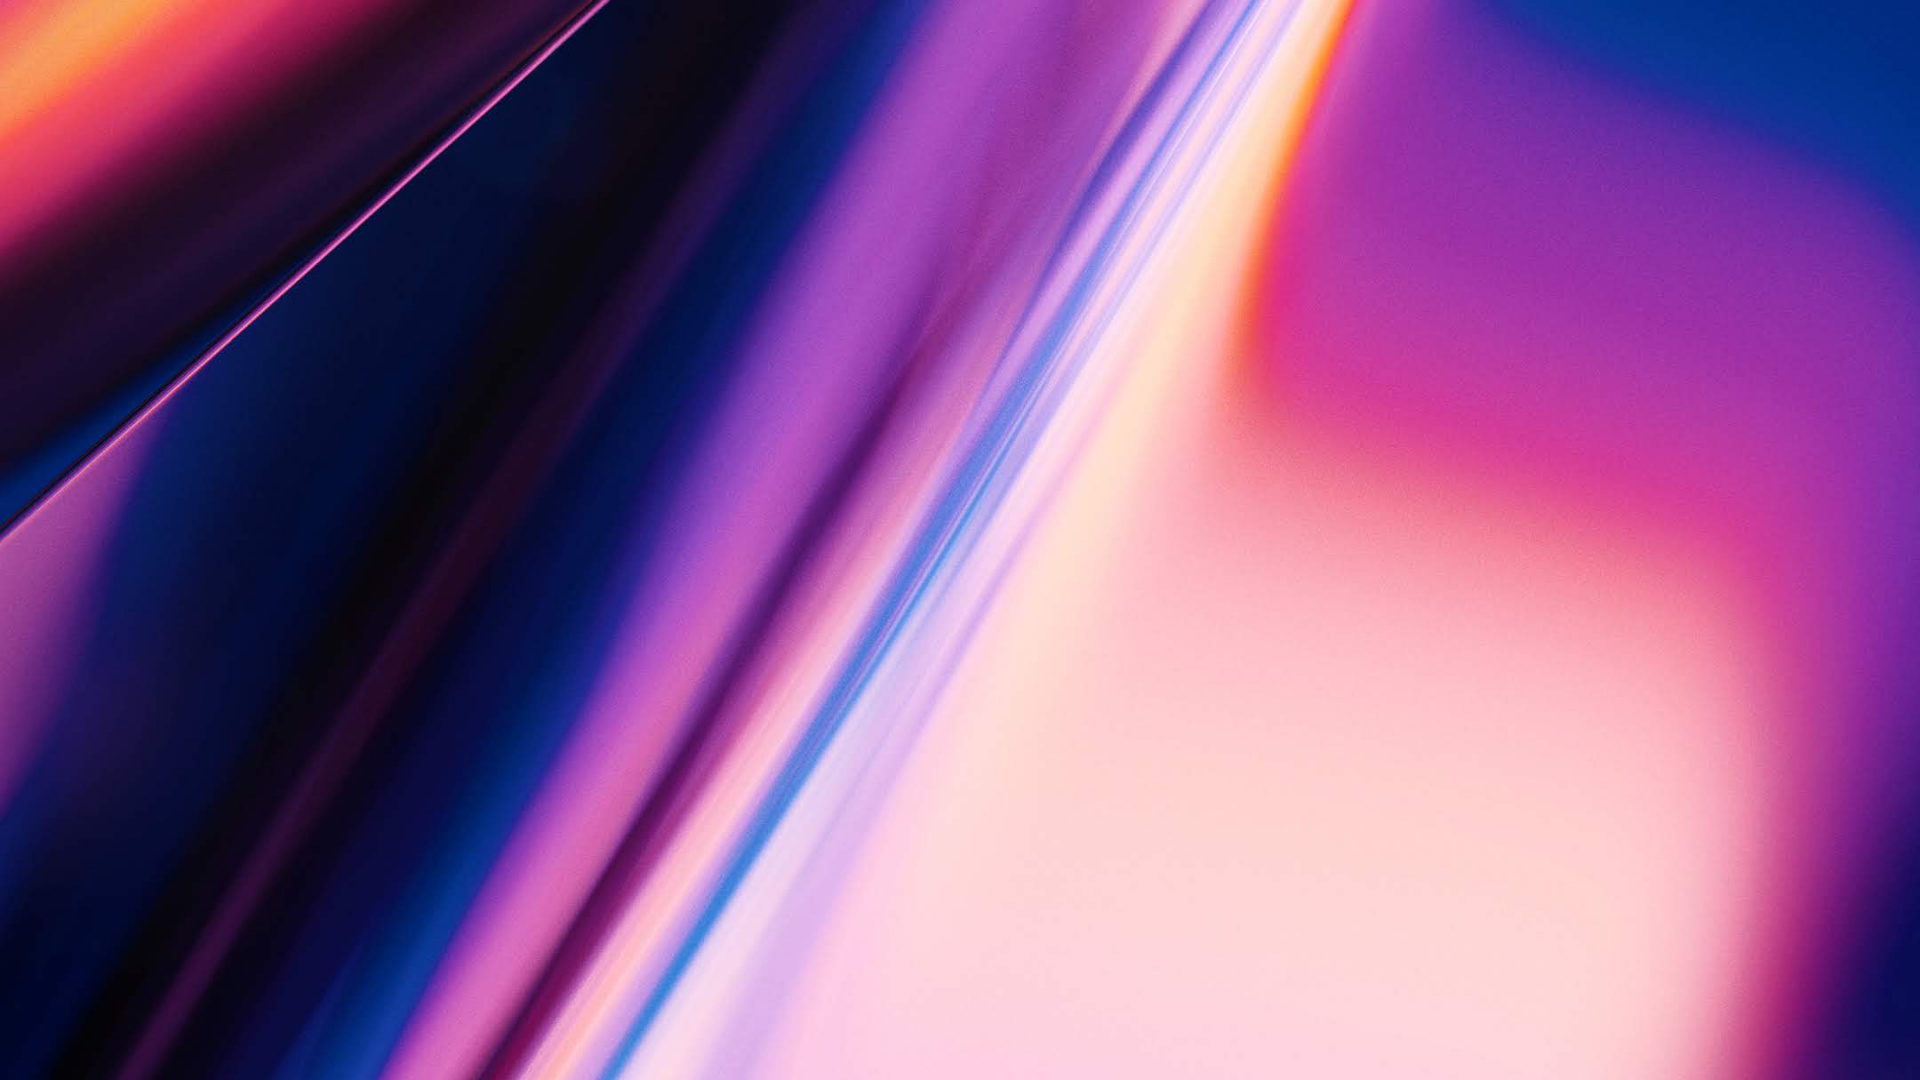 OnePlus 7 Pro, Oneplus 7t, Oneplus 8, Android, Azul. Wallpaper in 1920x1080 Resolution